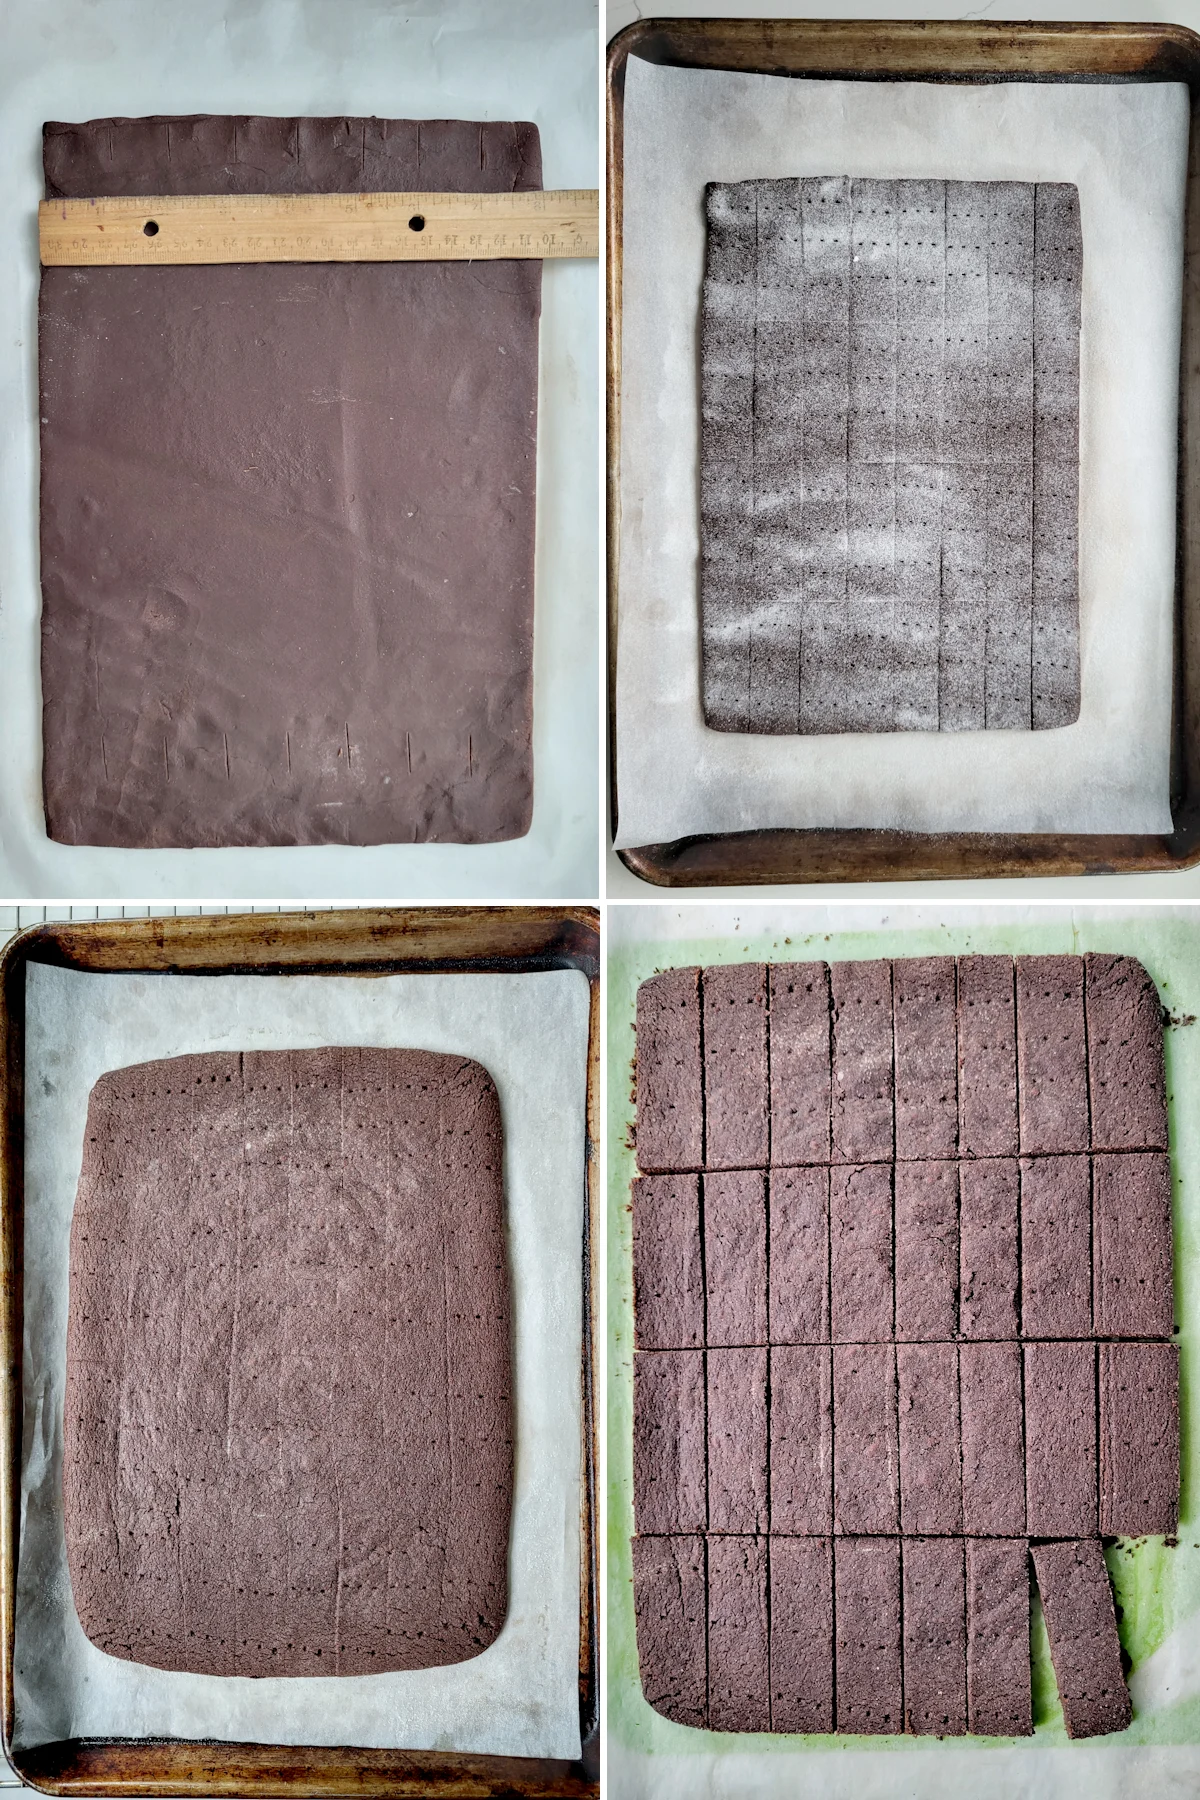 A rectangle of chocolate dough. A rectangle of chocolate dough sprinkled with sugar. A baked rectangle of chocolate dough. Chocolate shortbread cut into cookies.